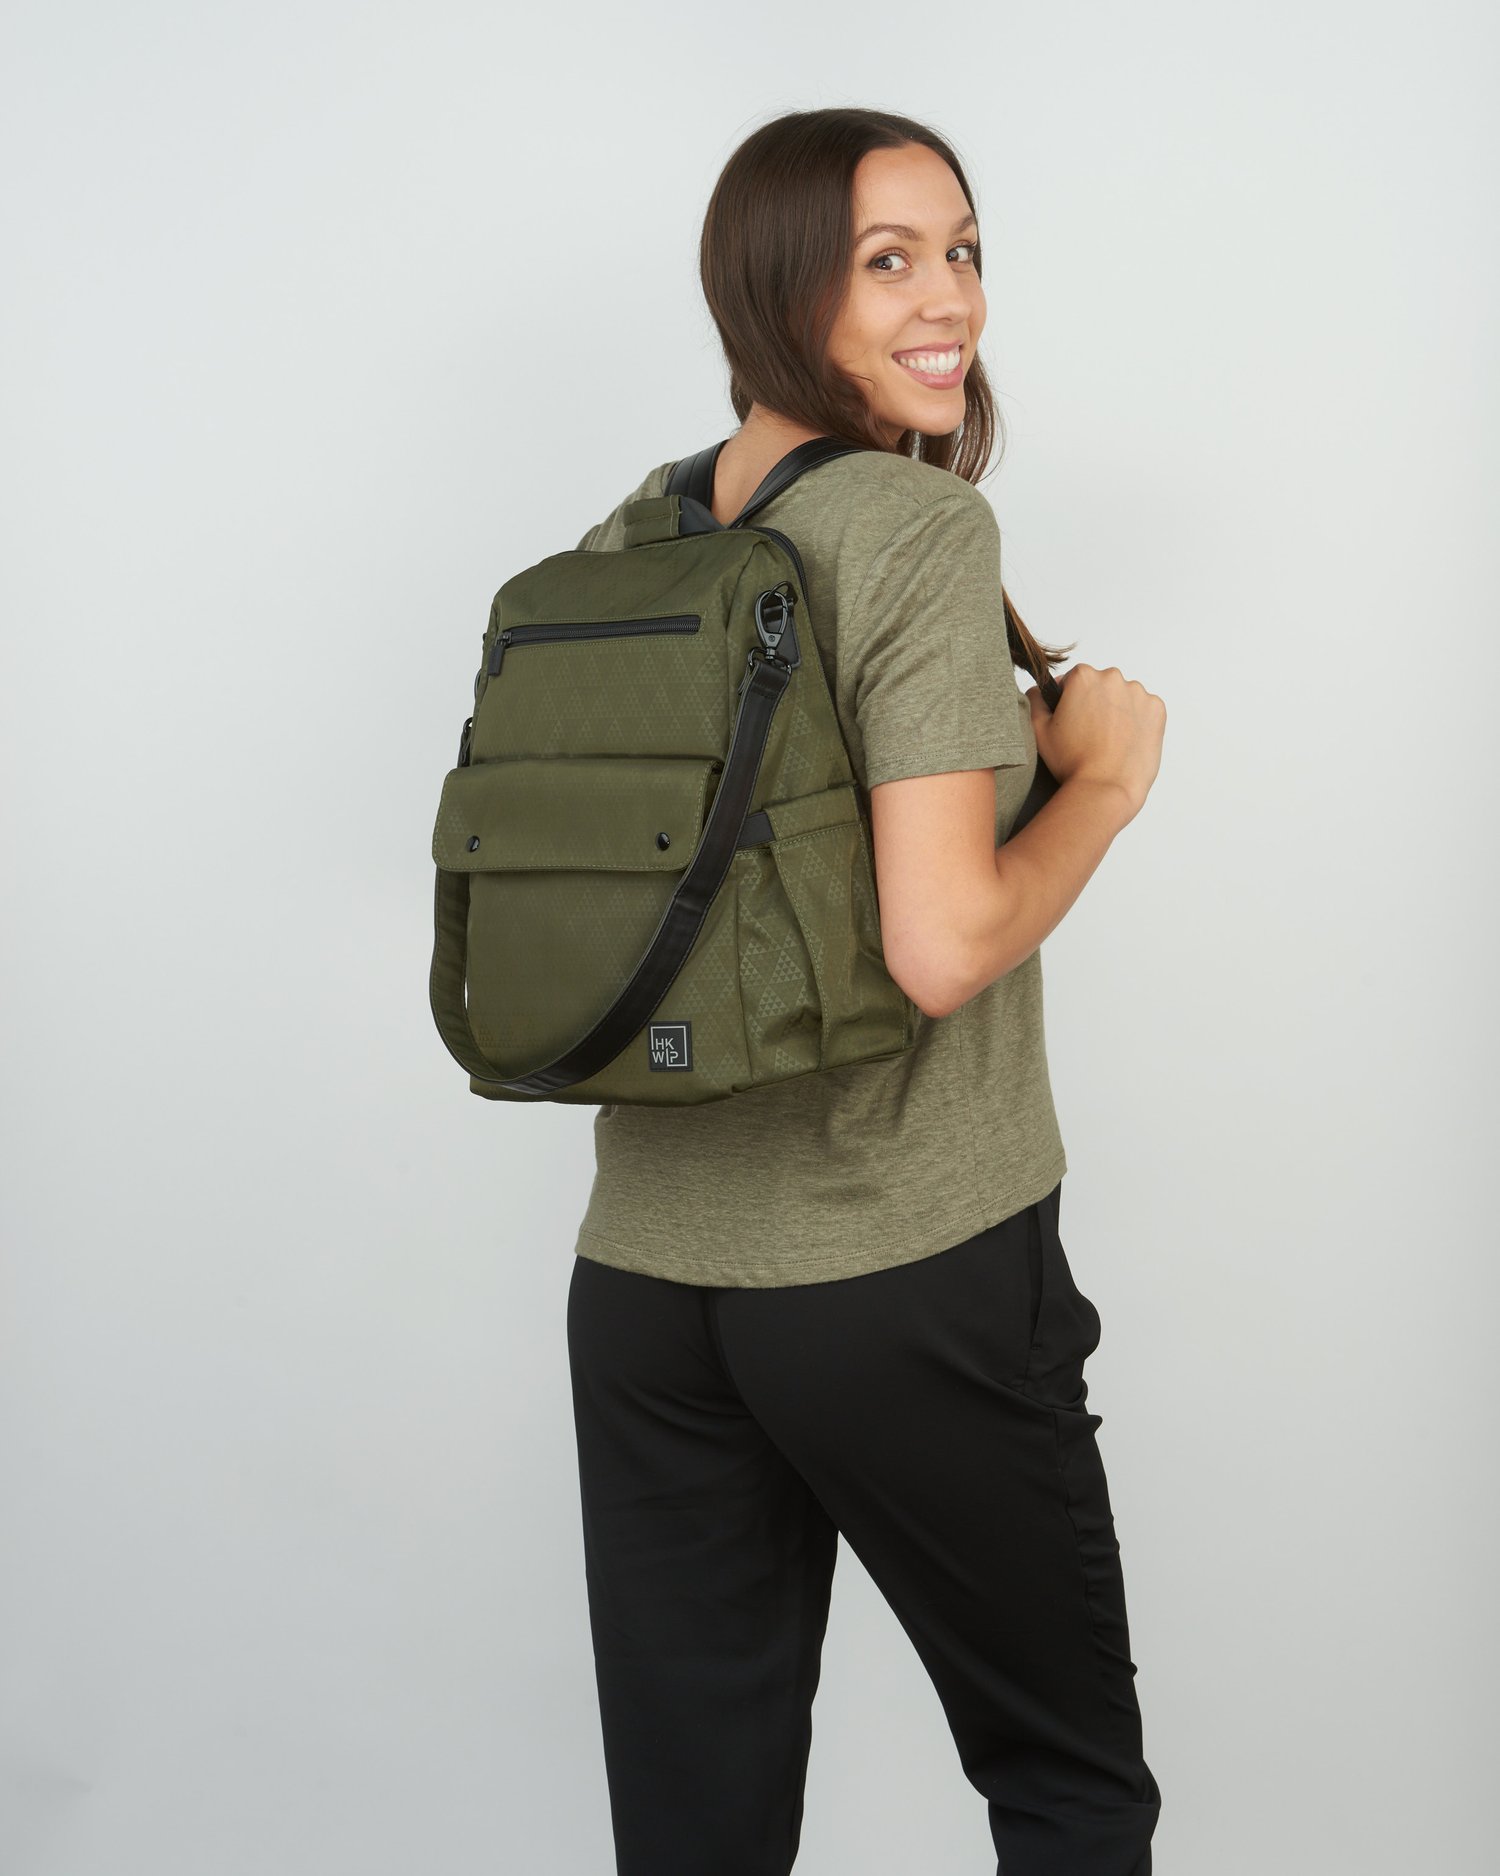 The Convertible Pocket Backpack